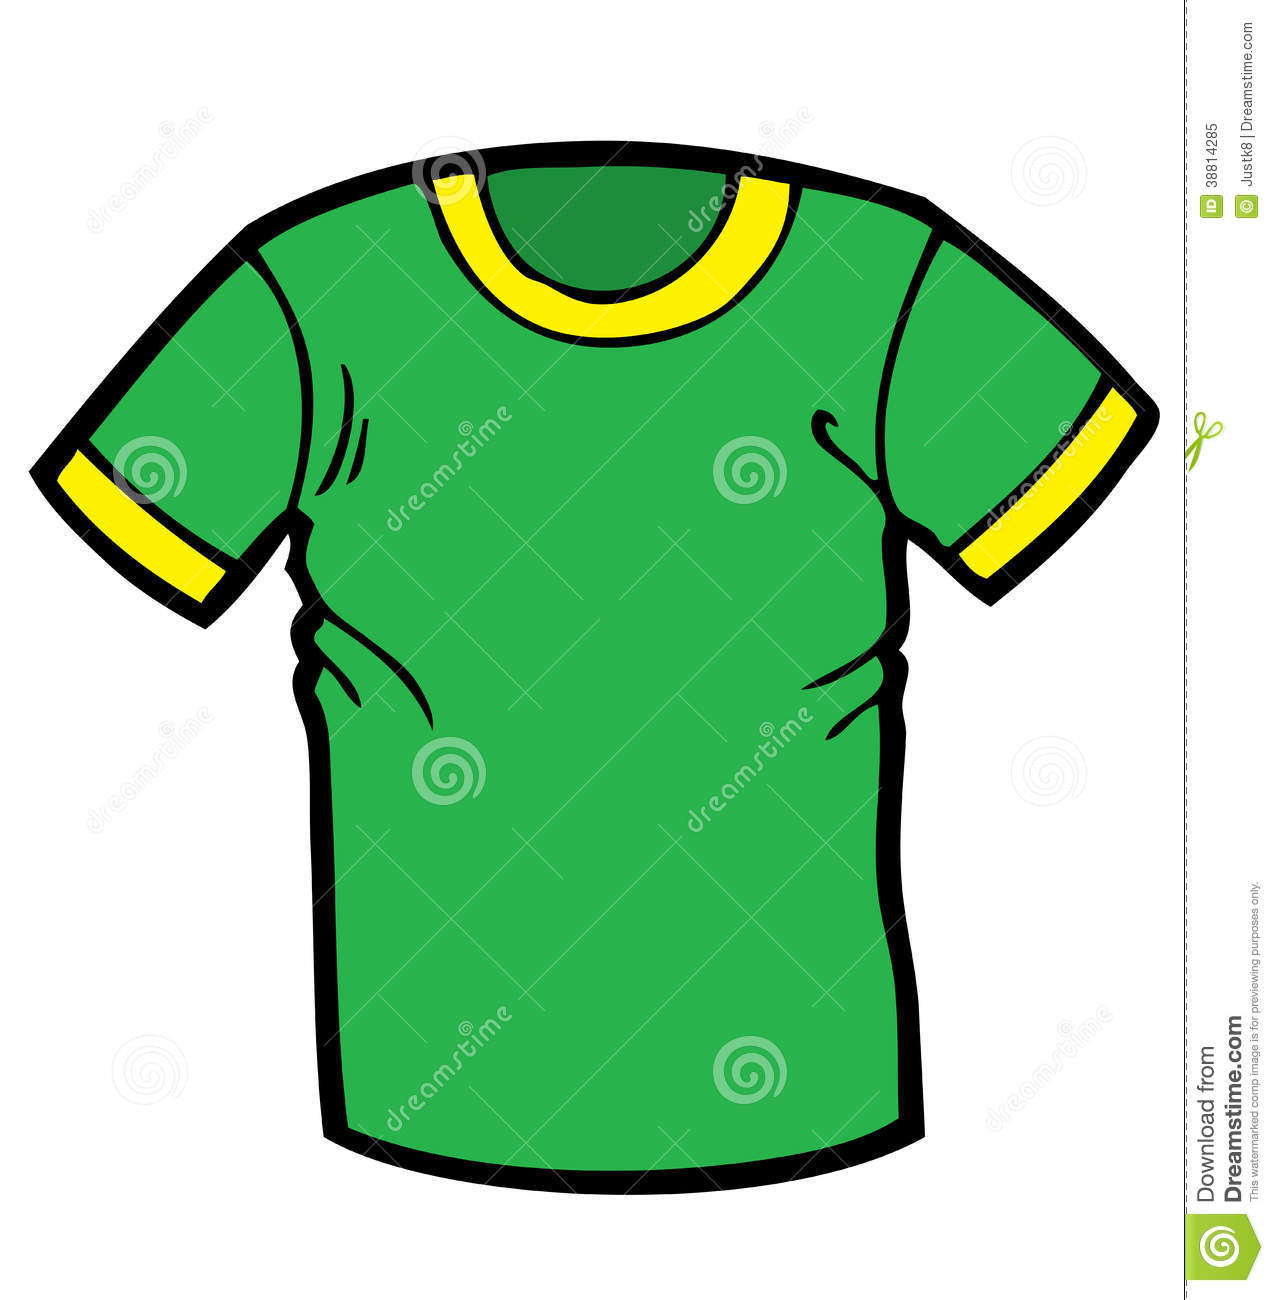 Cartoon Illustration Of A Green And Yellow T Shirt  These Can Be Used